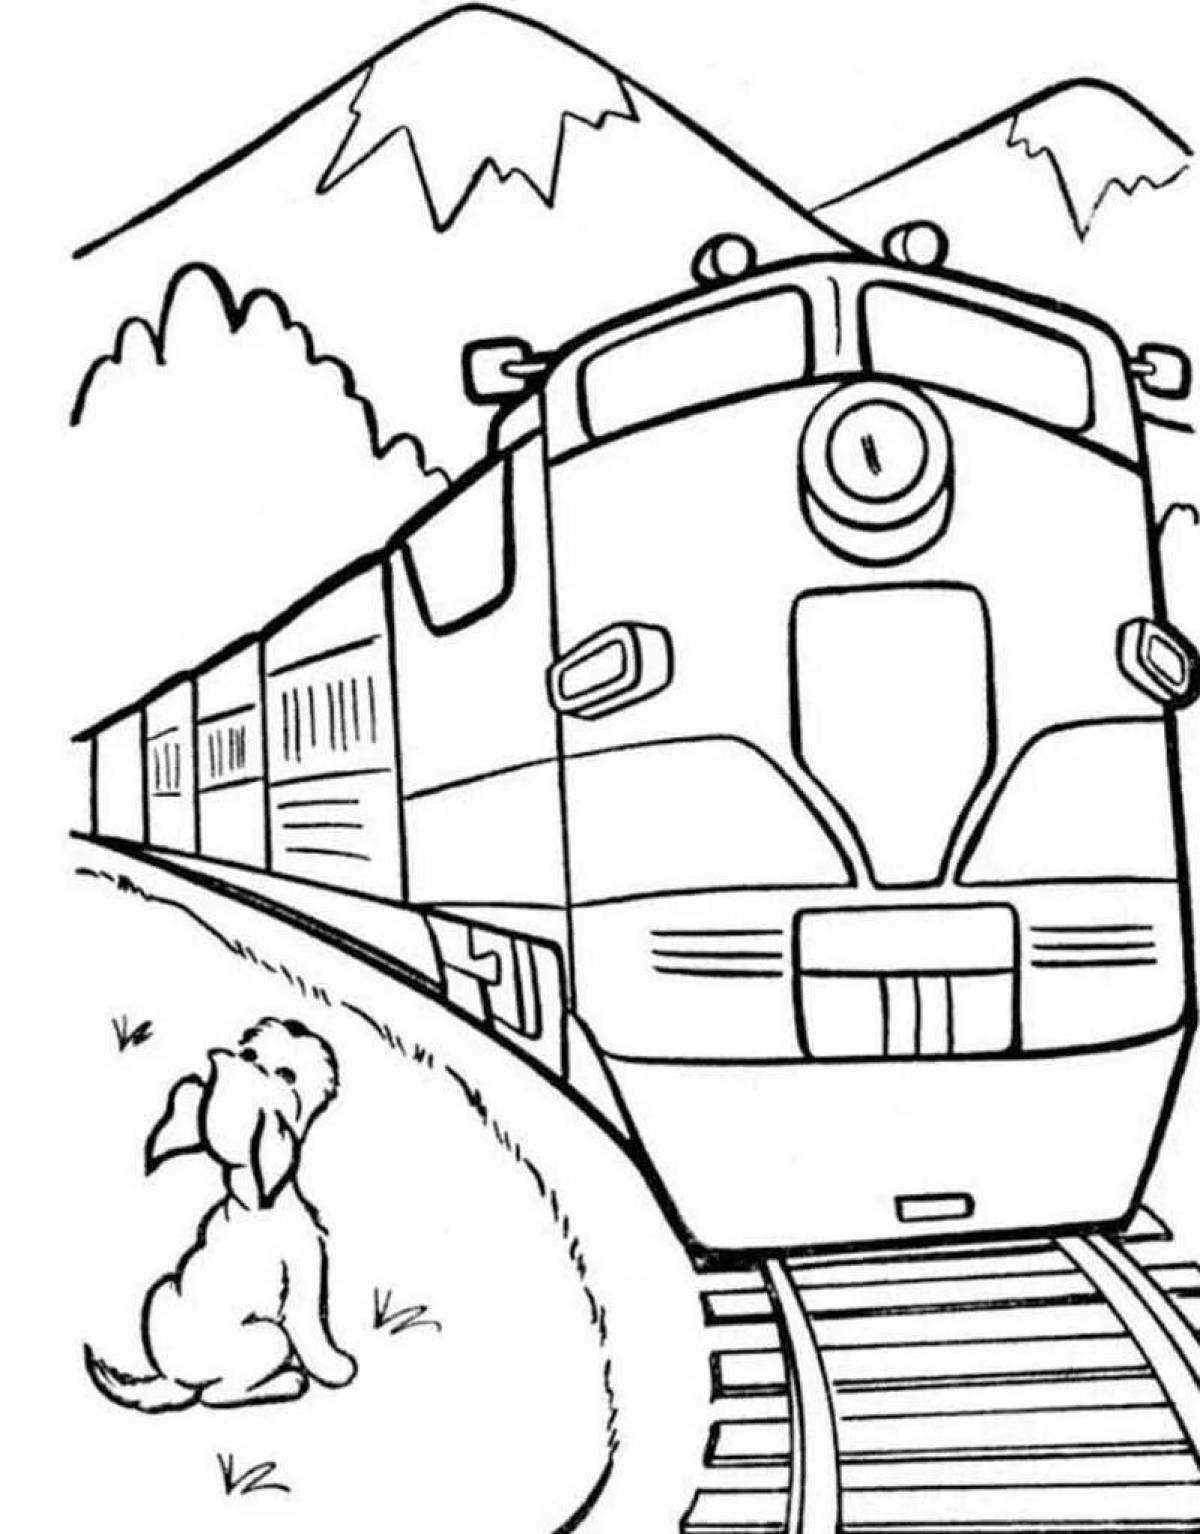 Glittering rail transport coloring book for kids